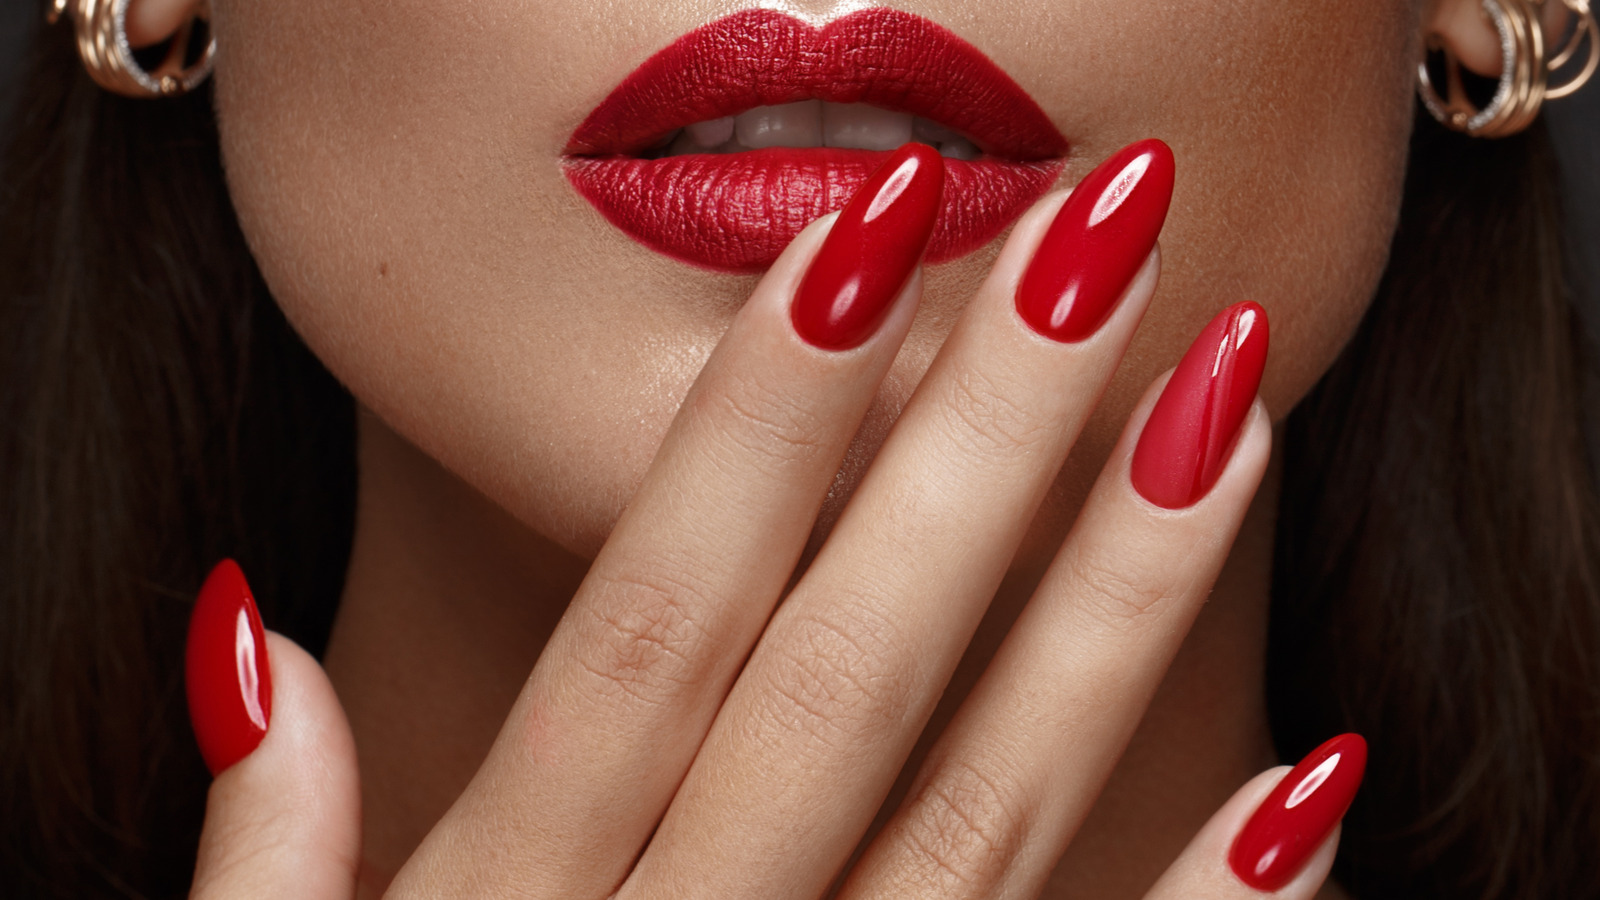 1. How to Fix Nail Polish That is Too Light in Color - wide 4